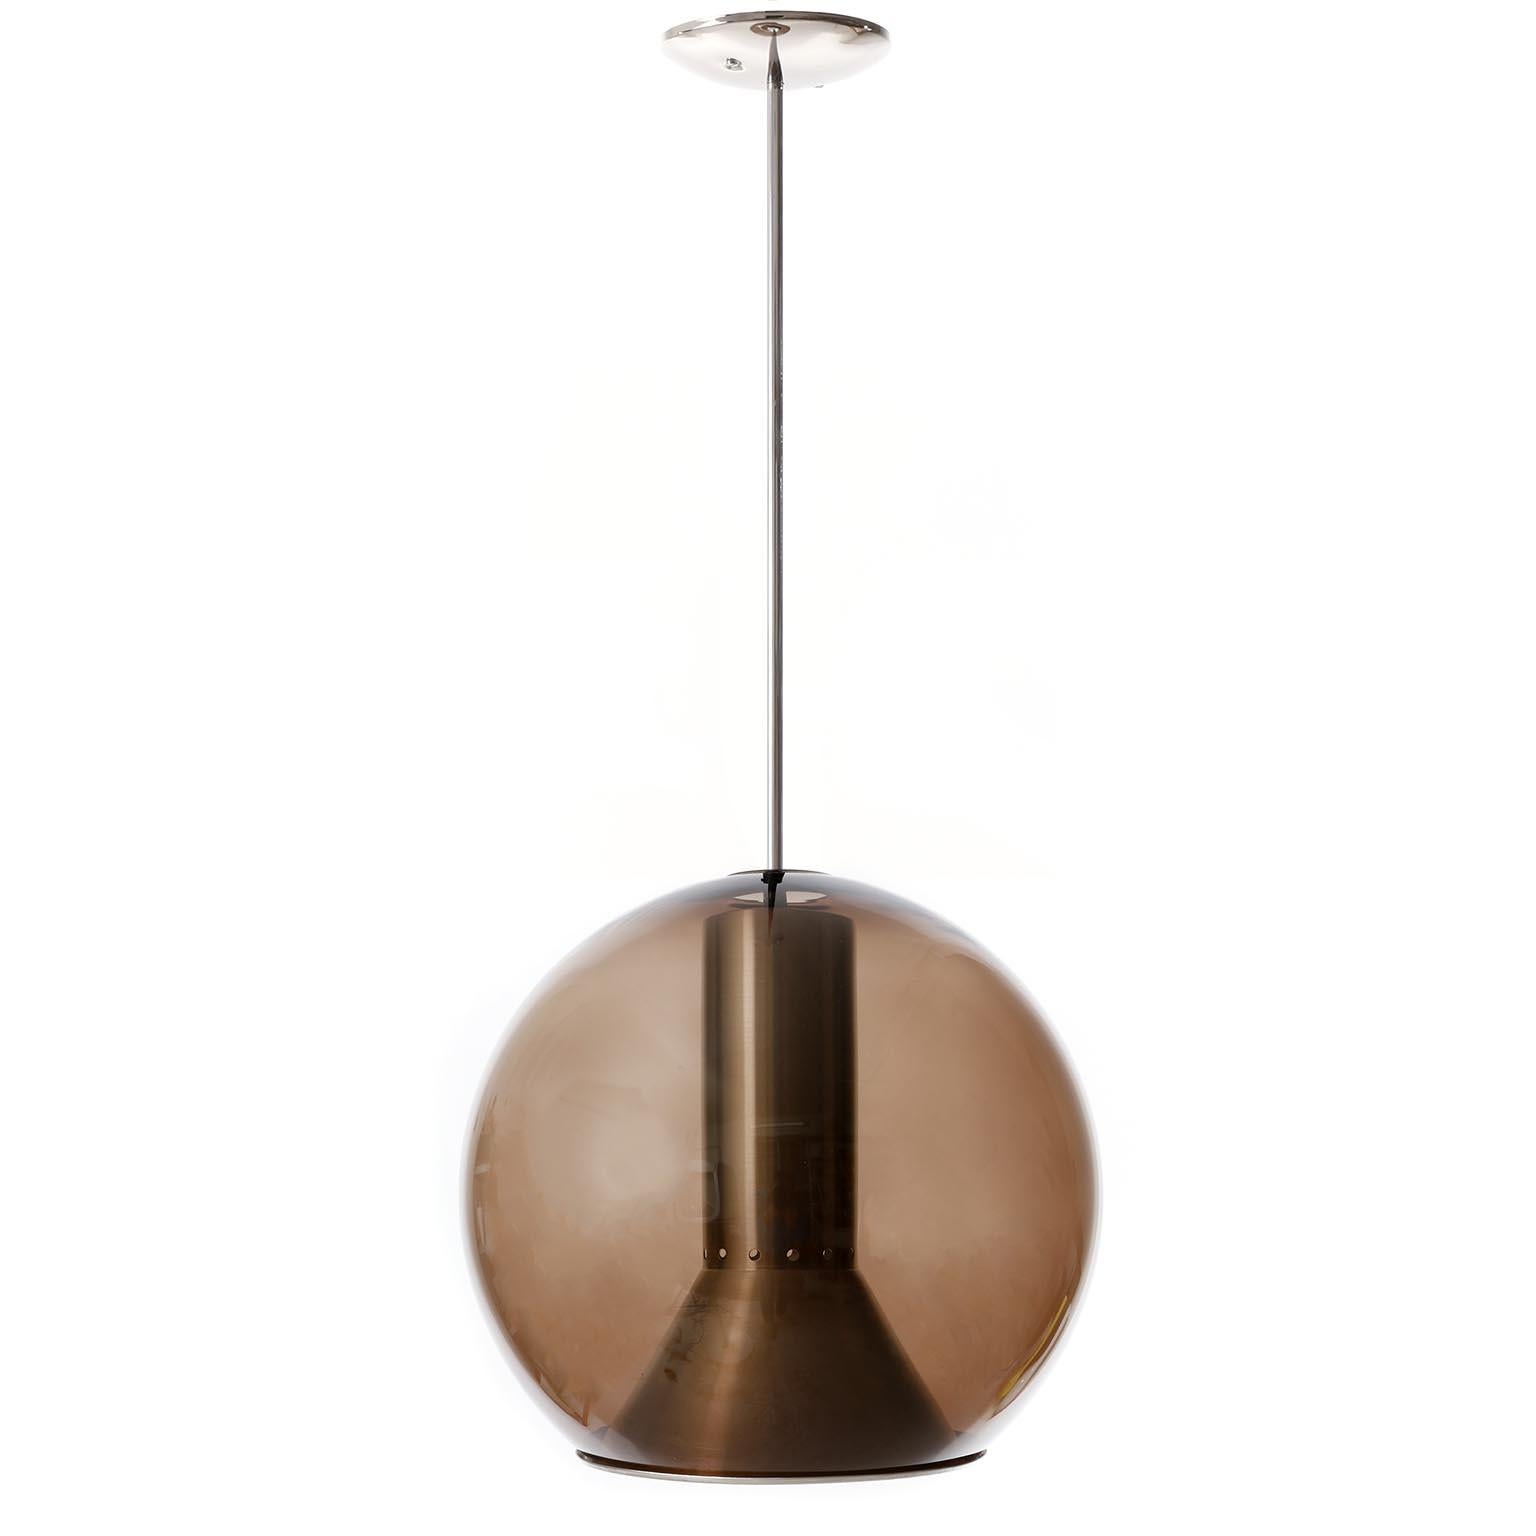 A set of three pendant lights or hanging lamps designed by Frank Ligtelijn for RAAK Amsterdam, Netherlands, manufactured in midcentury, circa 1970 (late 1960 or ealry 1970s).
Each light features a smoked brown glass globe with an aluminium